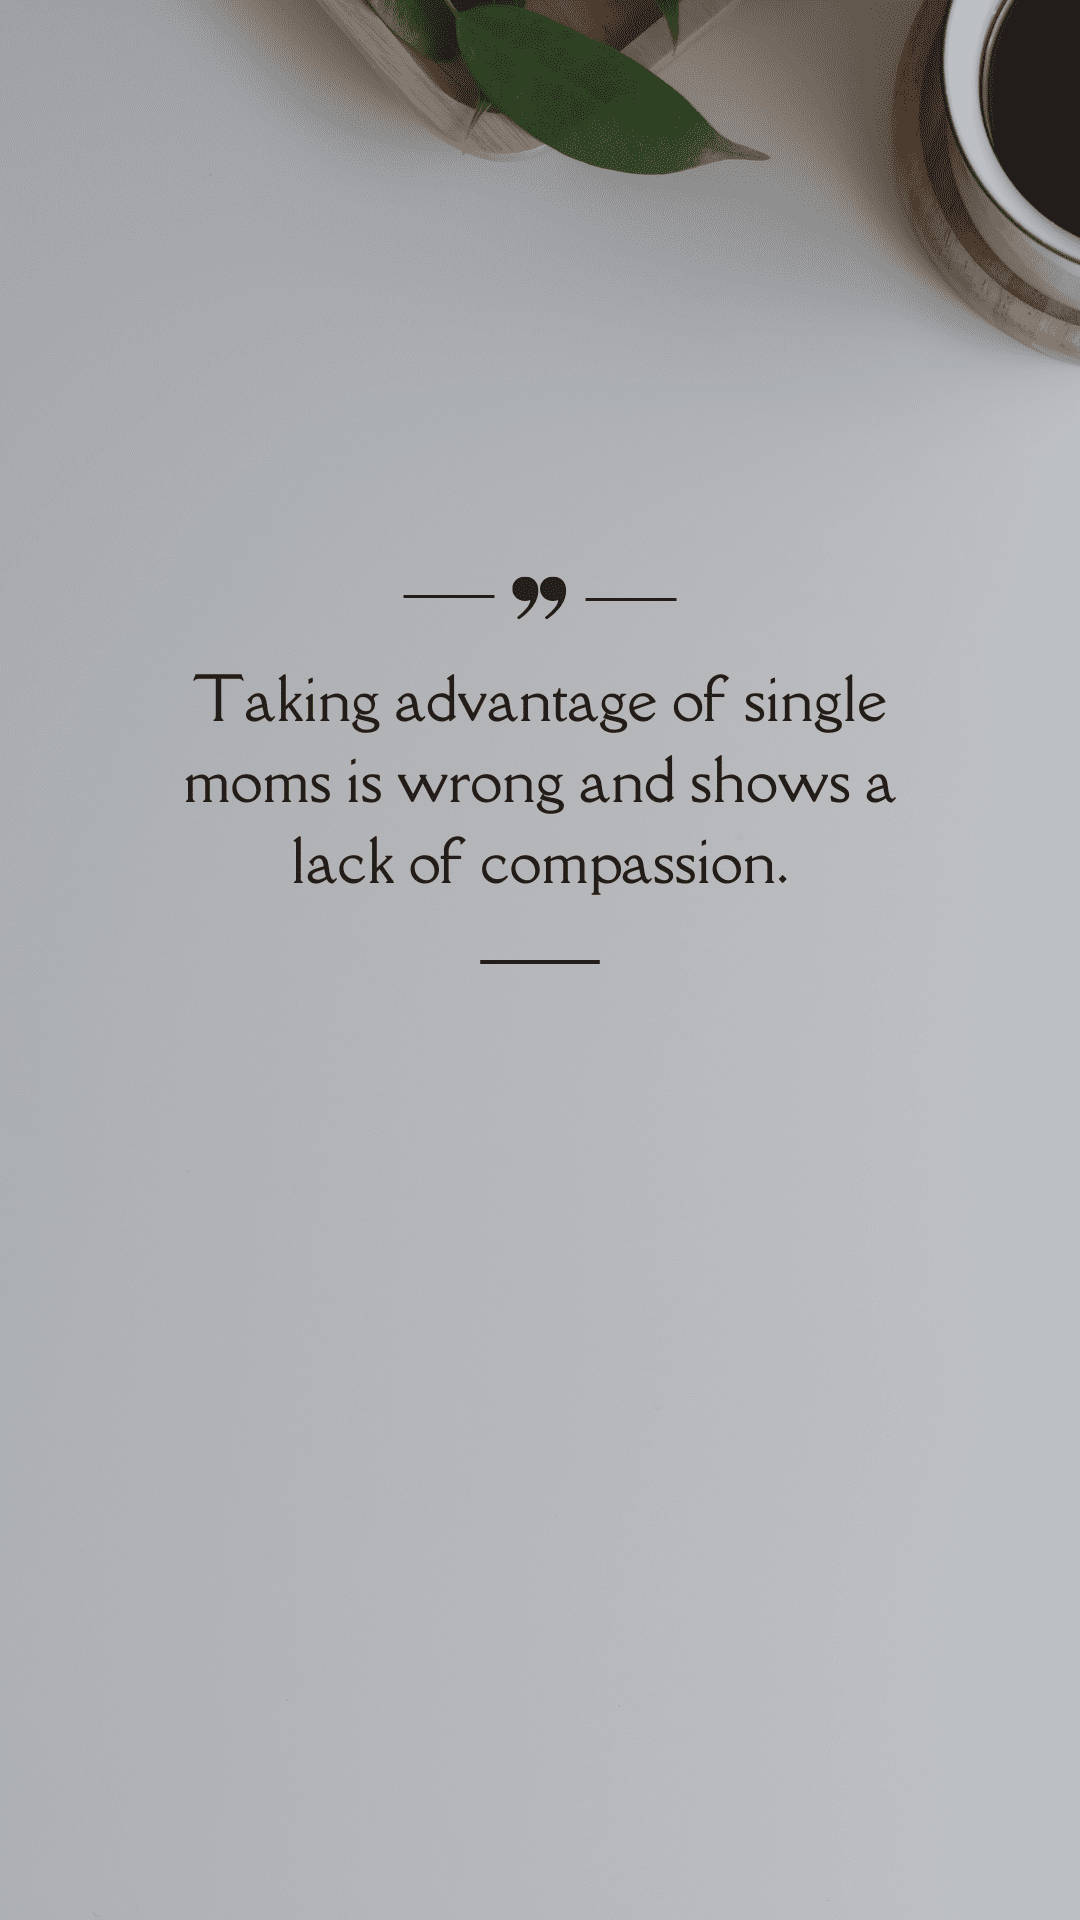 Taking advantage of single moms is wrong and shows a lack of compassion. (Quote)